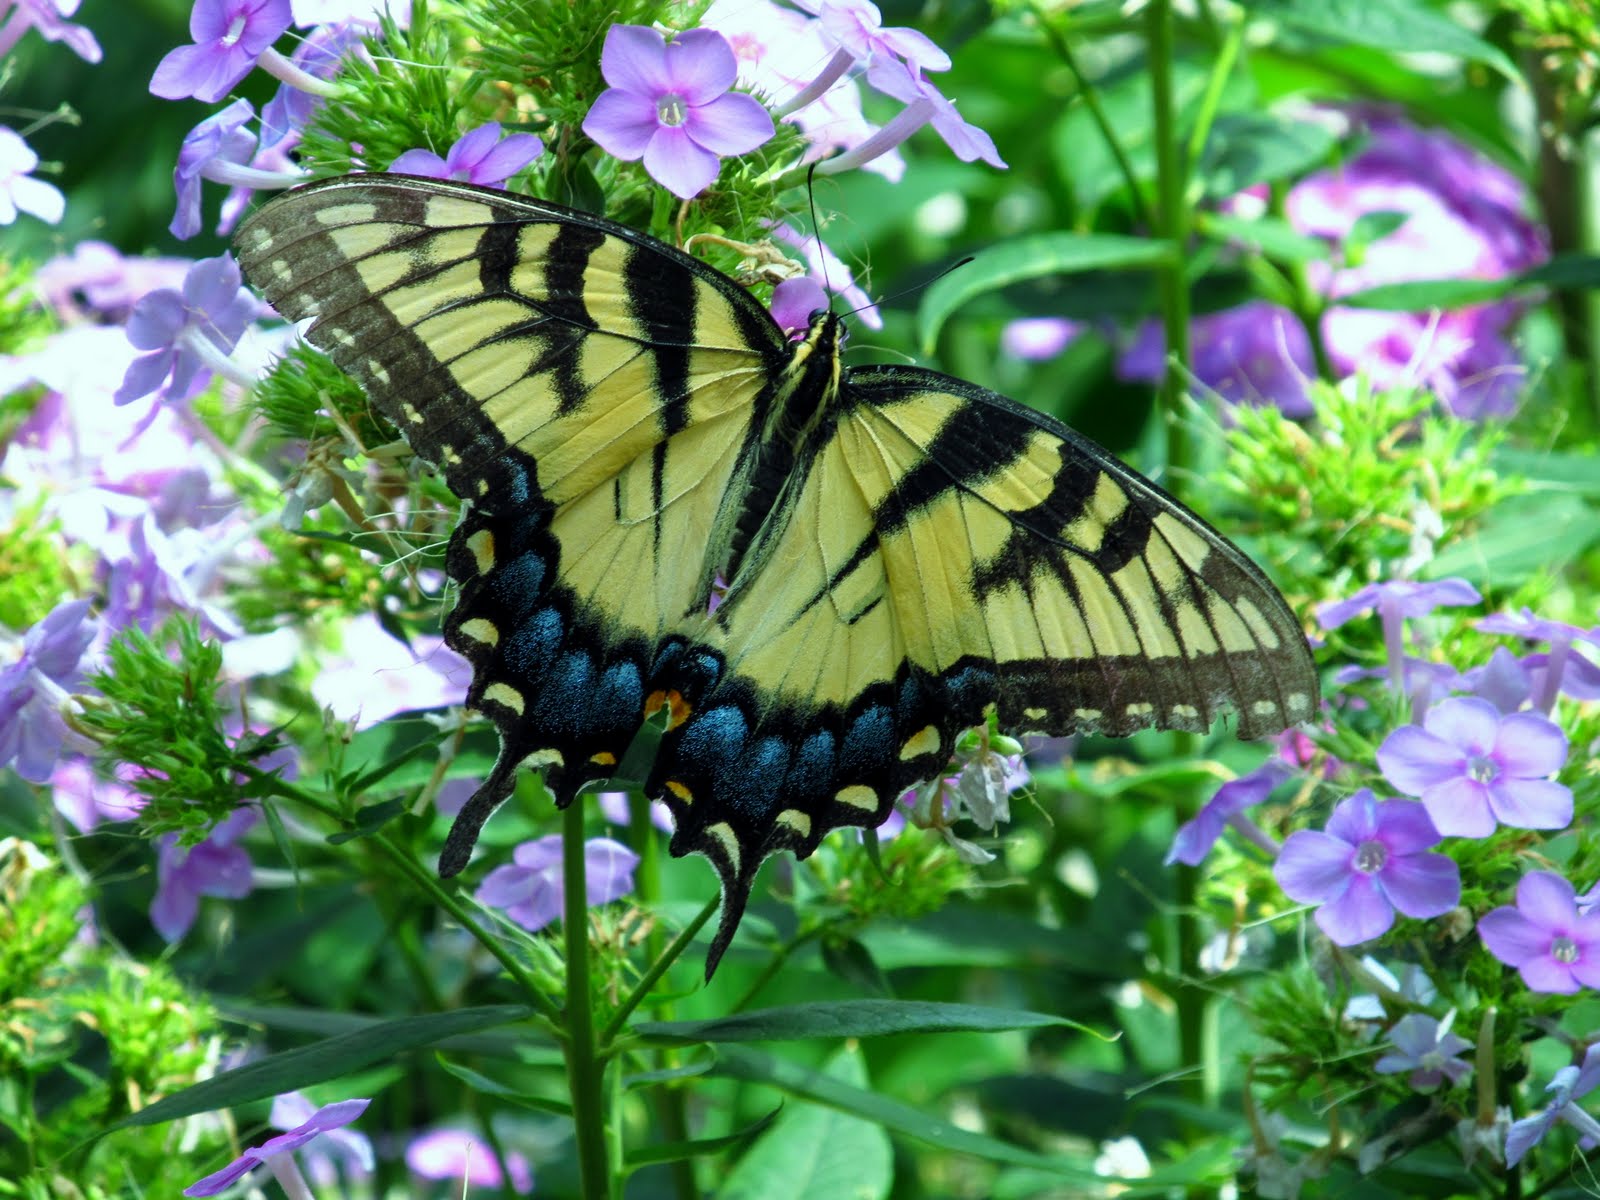 Thoughts from Pastor Dave: Butterfly People